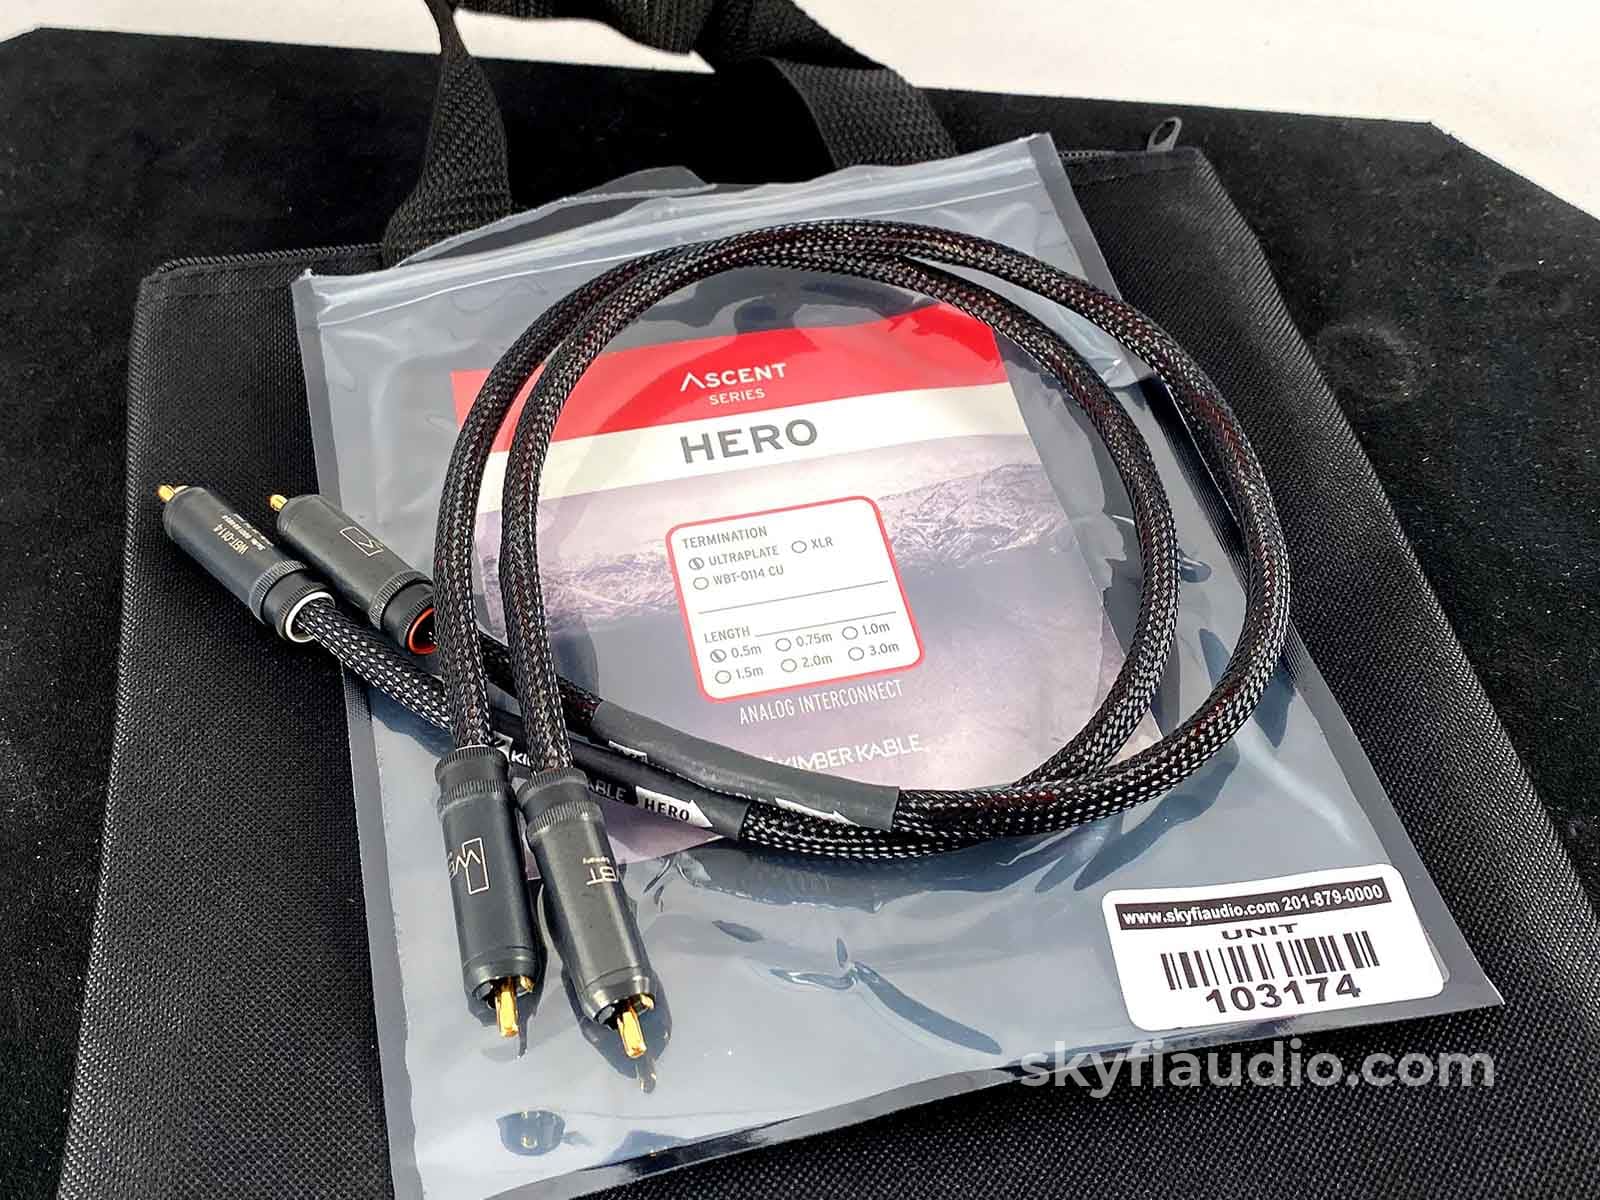 Kimber Kable - Hero RCA Cables With WBT Connectors - 0.5M, New